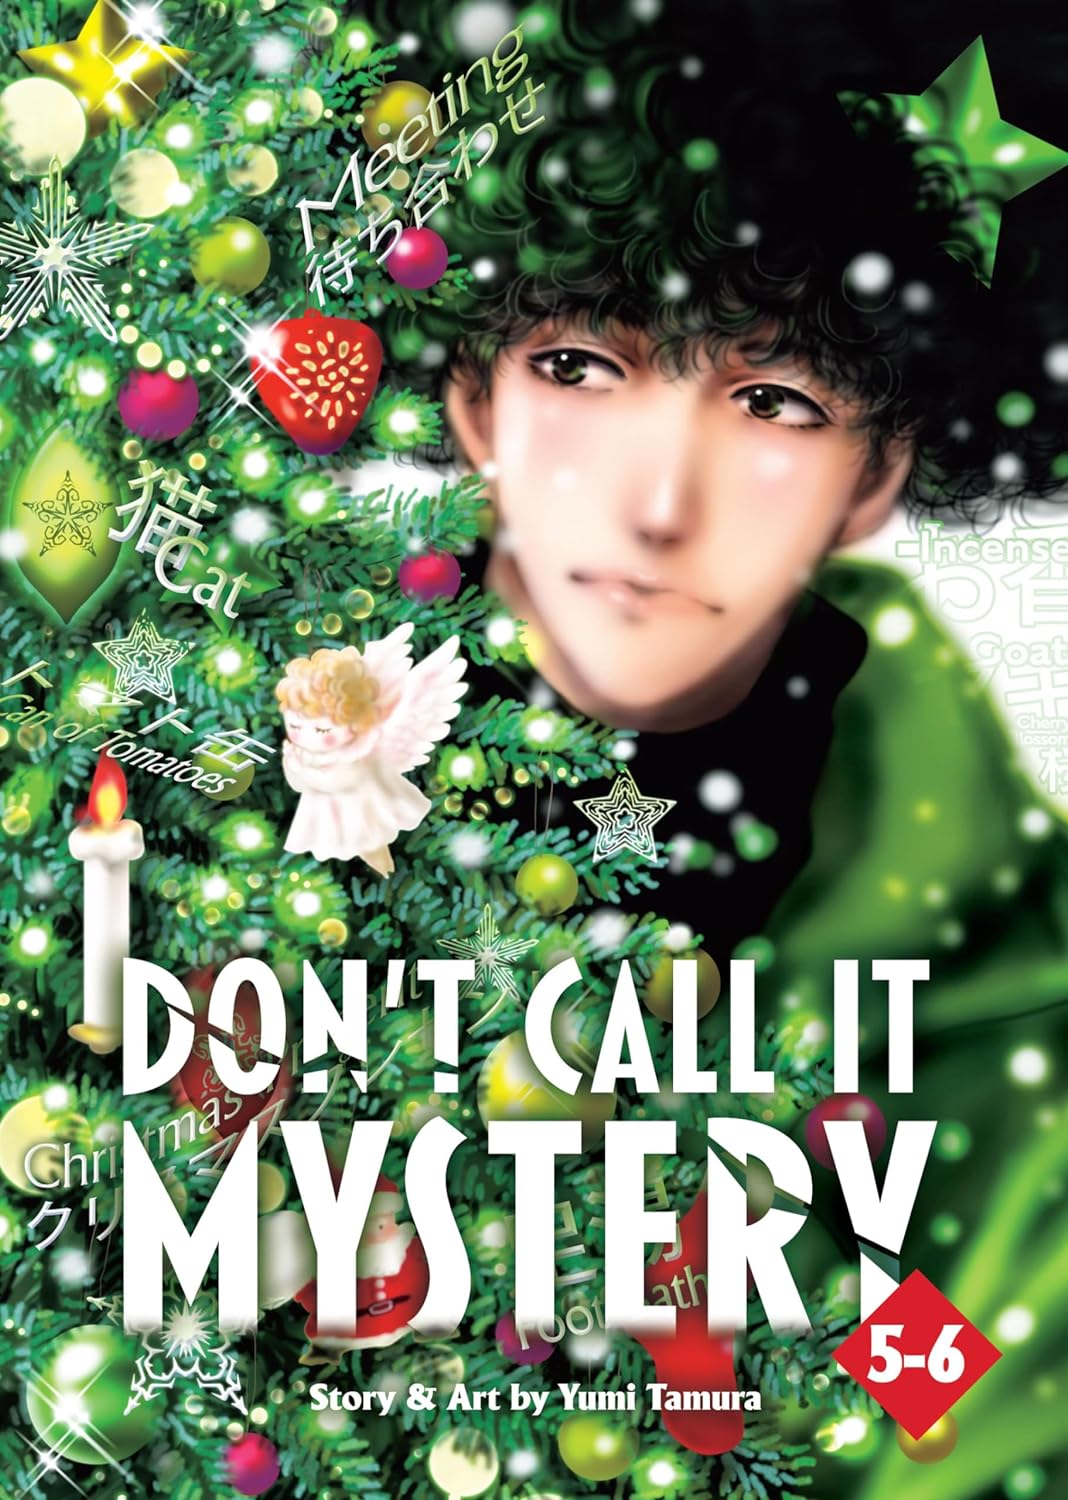 Don't Call It Mystery (Omnibus) Vol. 05-06